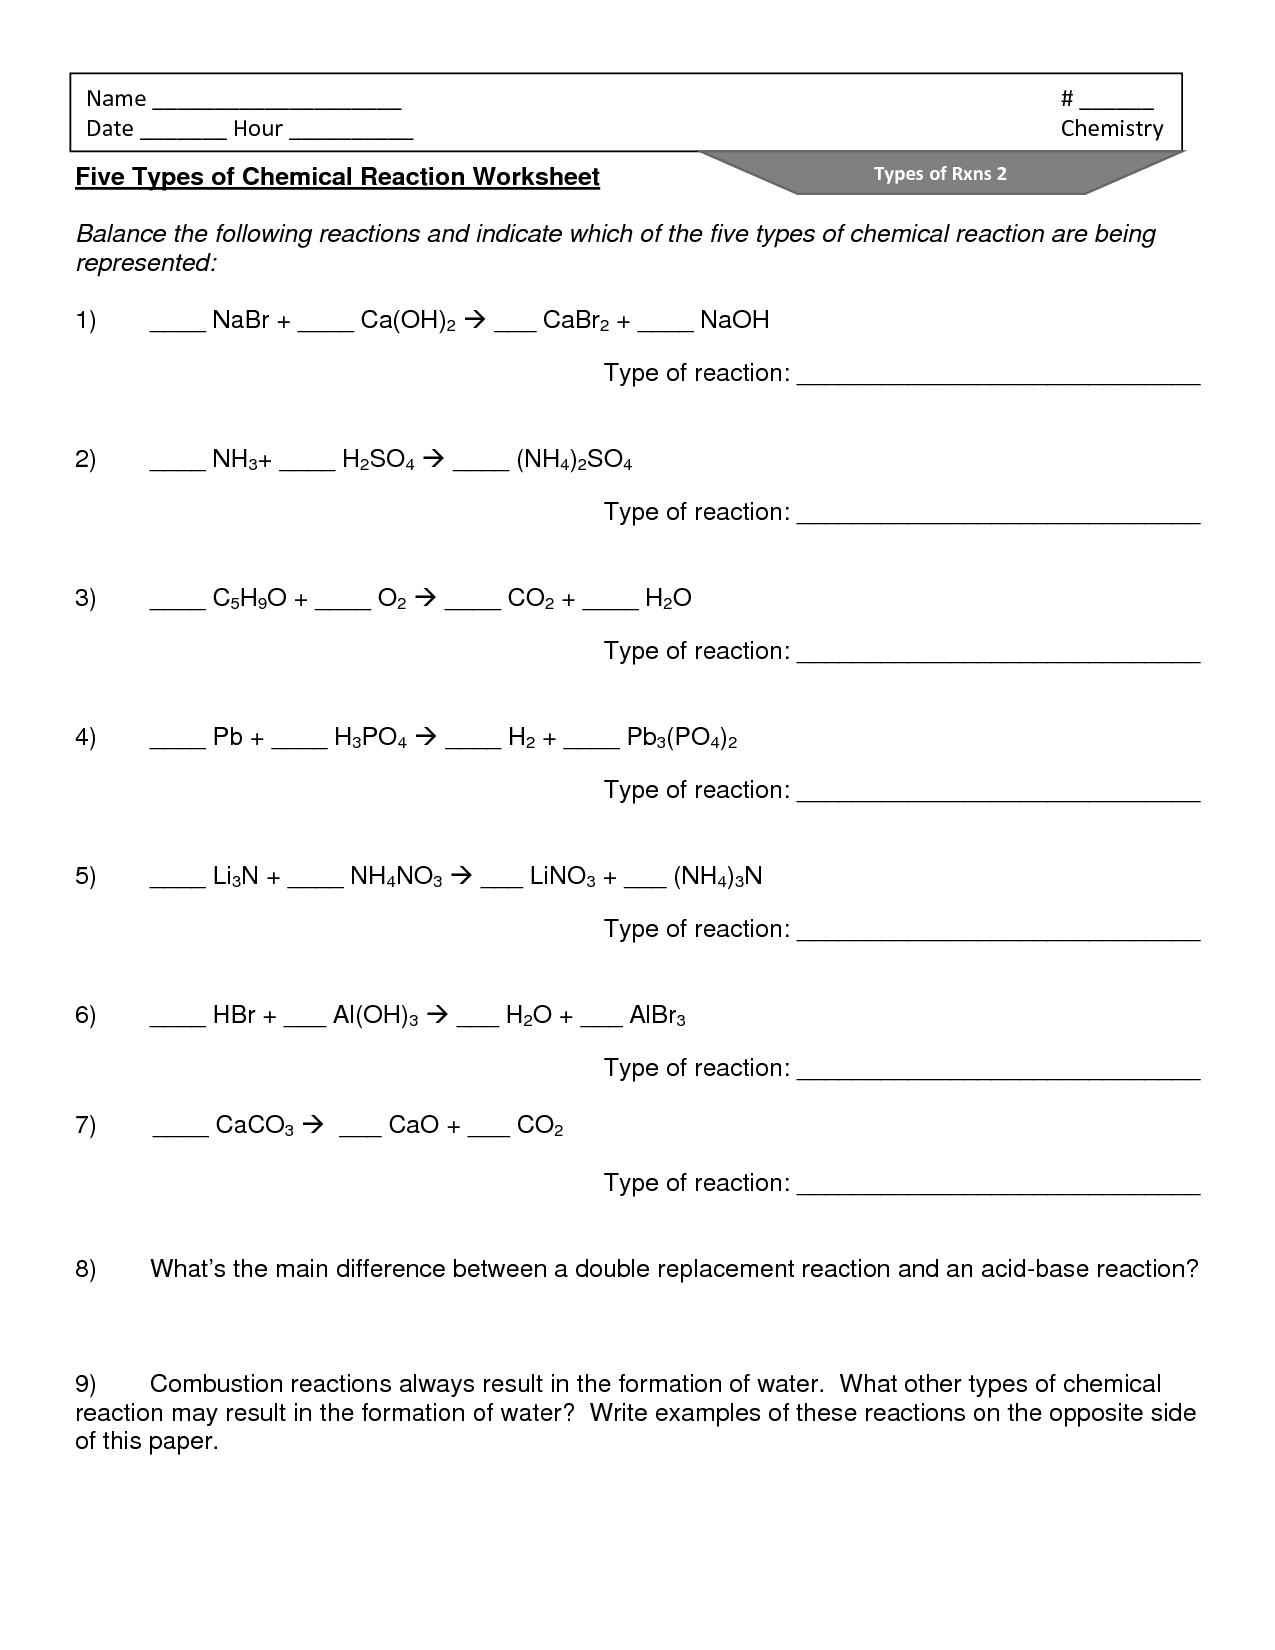 10 Best Images of Types Of Reactions Worksheet - Types of Chemical ...